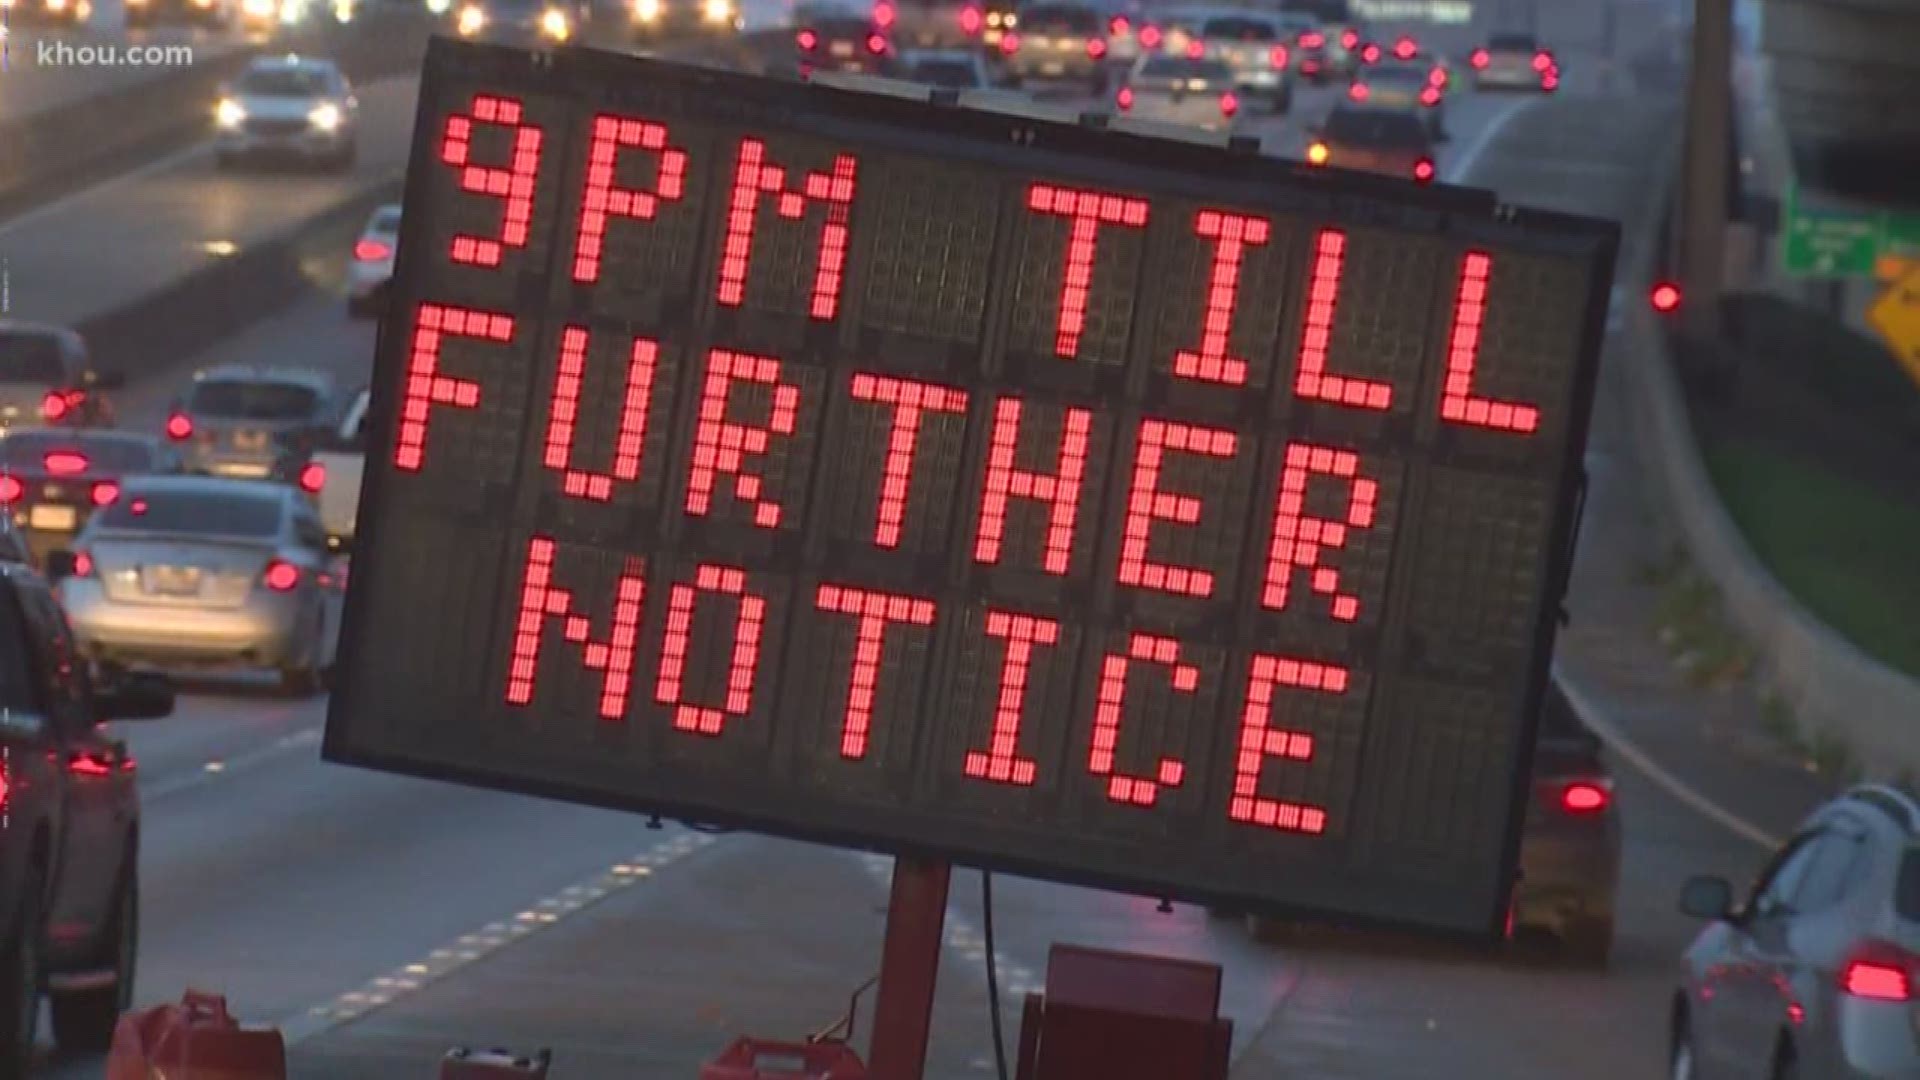 At 9 p.m. Friday, TxDOT is closing the I-45 Gulf Freeway ramp to I-69/288 southbound.